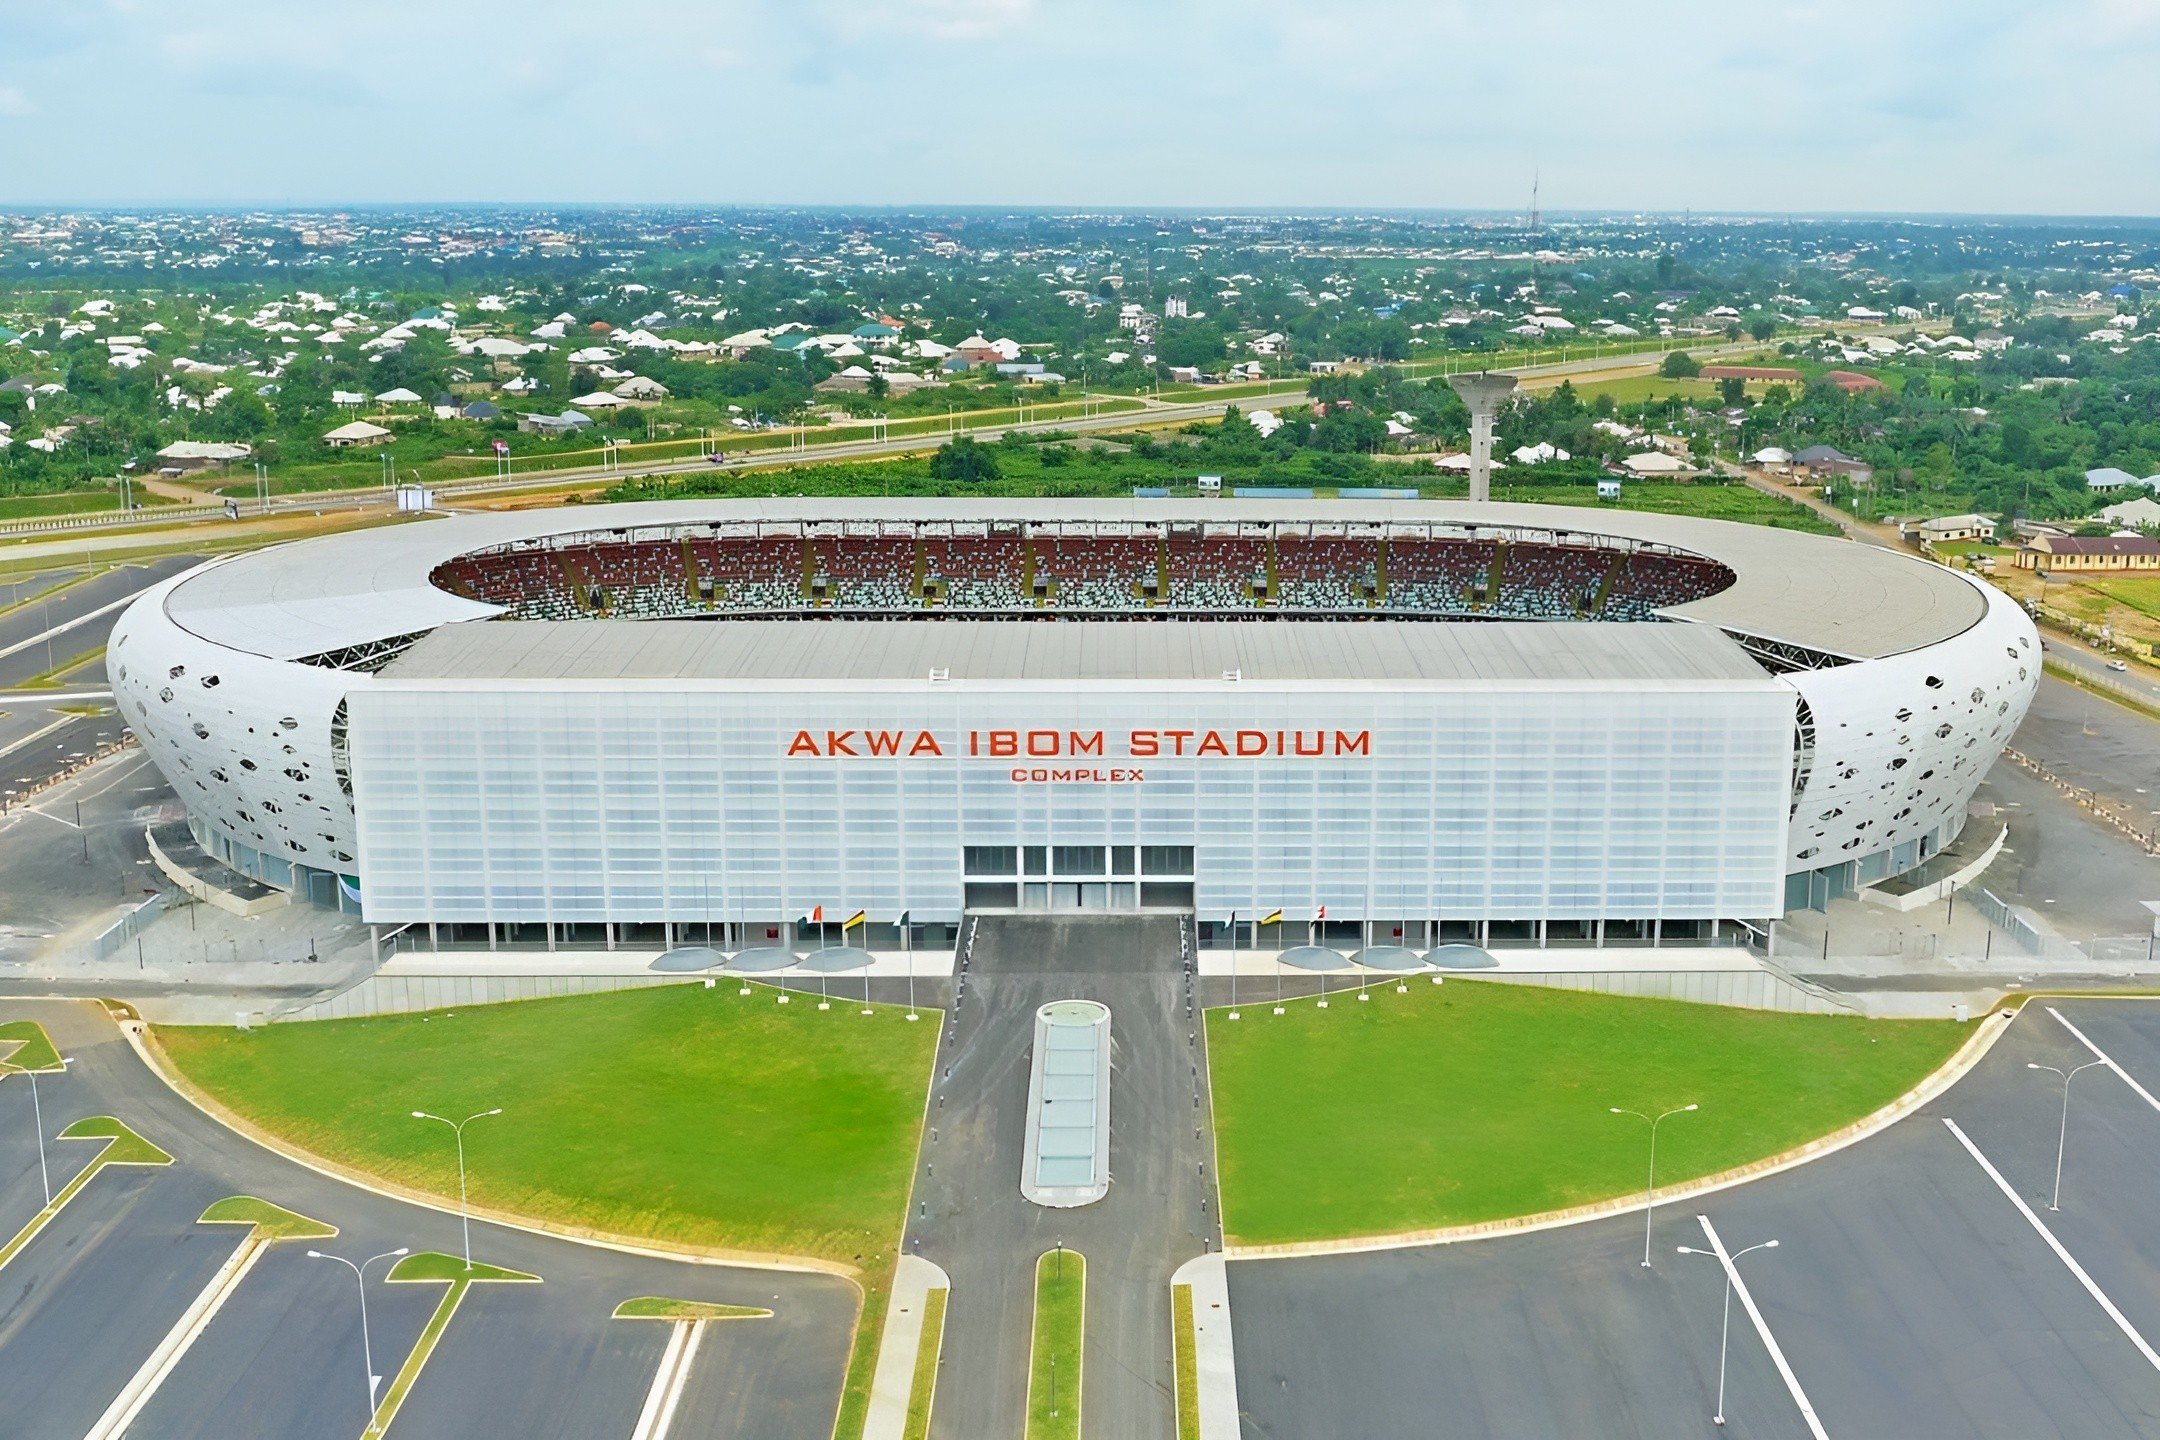 A view of the Niger Delta through the Lens – Akwa Ibom in Pictures